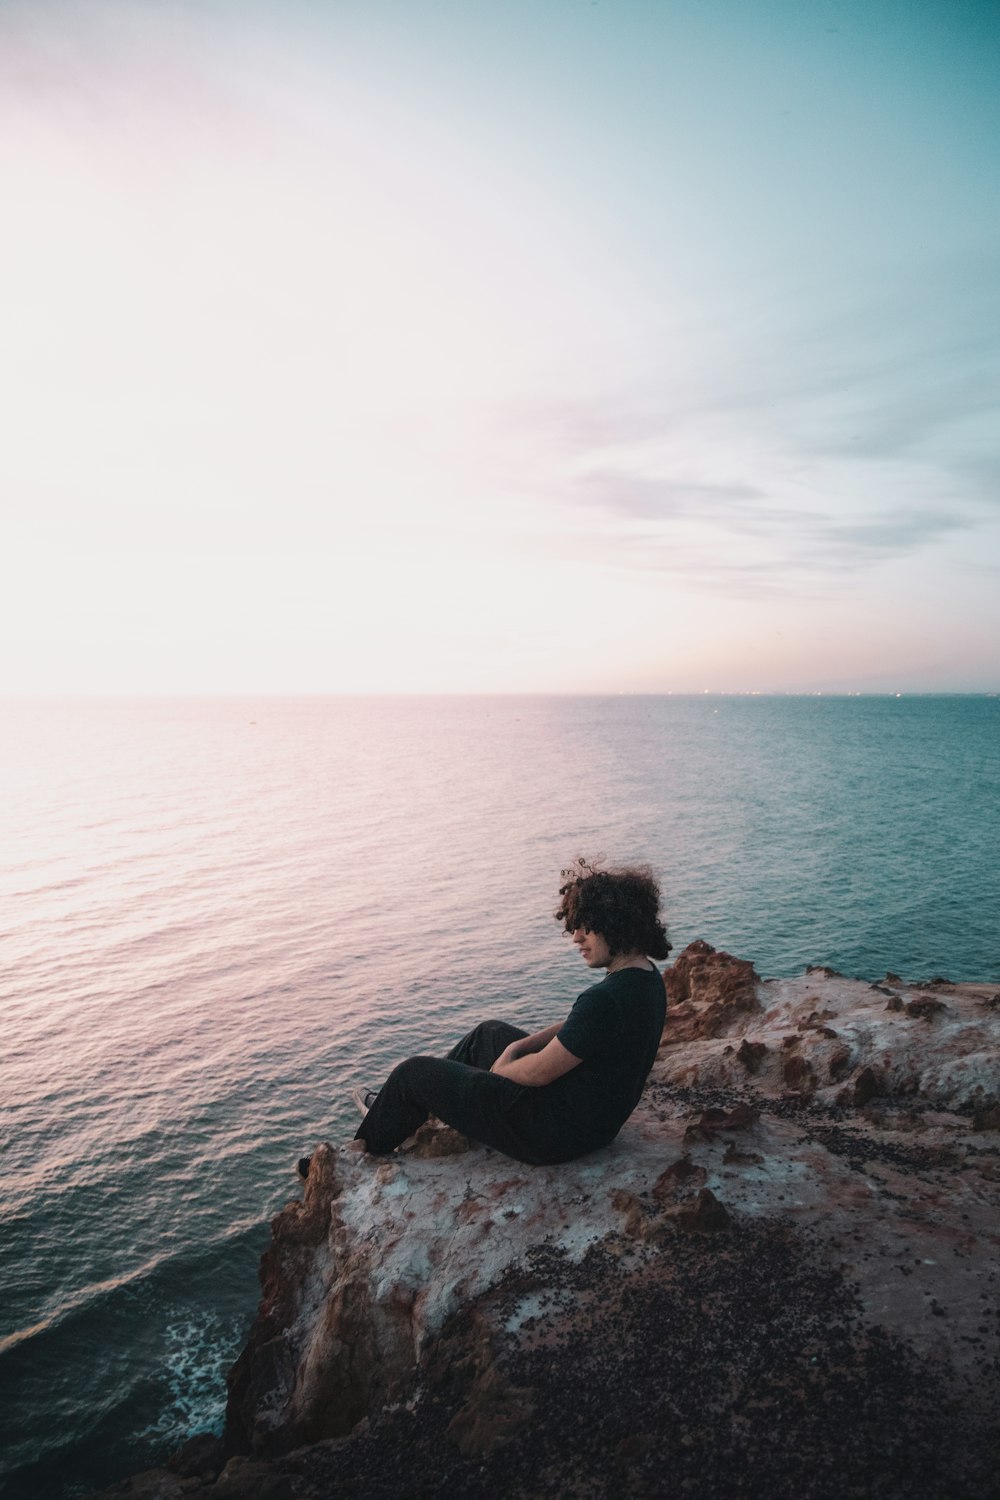 woman in black shirt sitting on rock by the sea during daytime